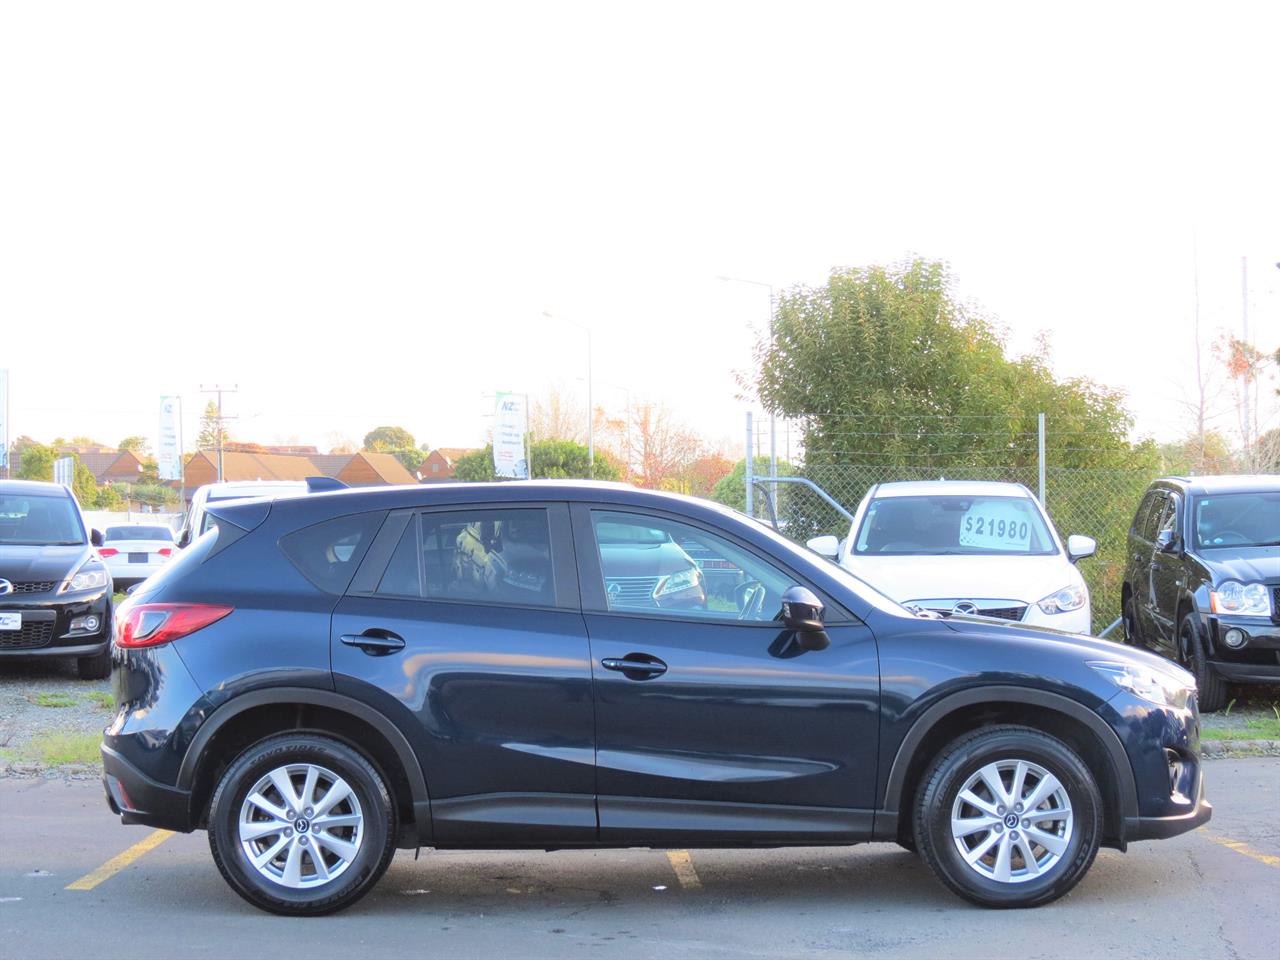 2014 Mazda CX-5 only $70 weekly